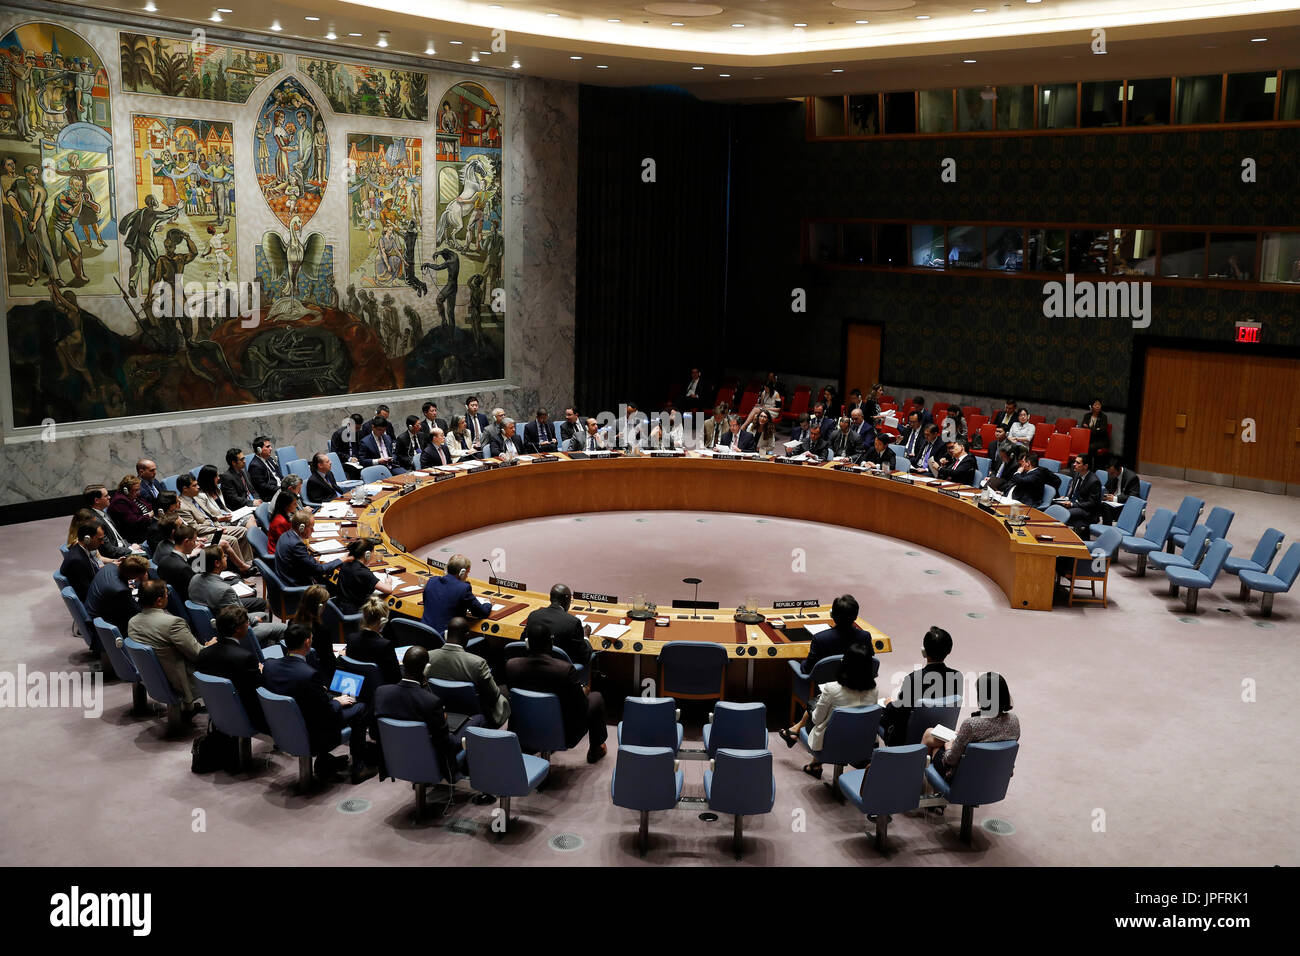 United Nations, New York, USA. 1st August, 2017. File photo taken on July 5, 2017 shows the United Nations Security Council holding an emergency meeting on issues in the Korean Peninsula at the UN headquarters in New York. China on July 31 concluded its rotating presidency of the UN Security Council for the month of July. Under the month-long Chinese presidency, the Security Council, which is the most powerful UN body, convened more than 30 meetings, adopted four resolutions and four presidential statements, and issued seven press statements. Stock Photo